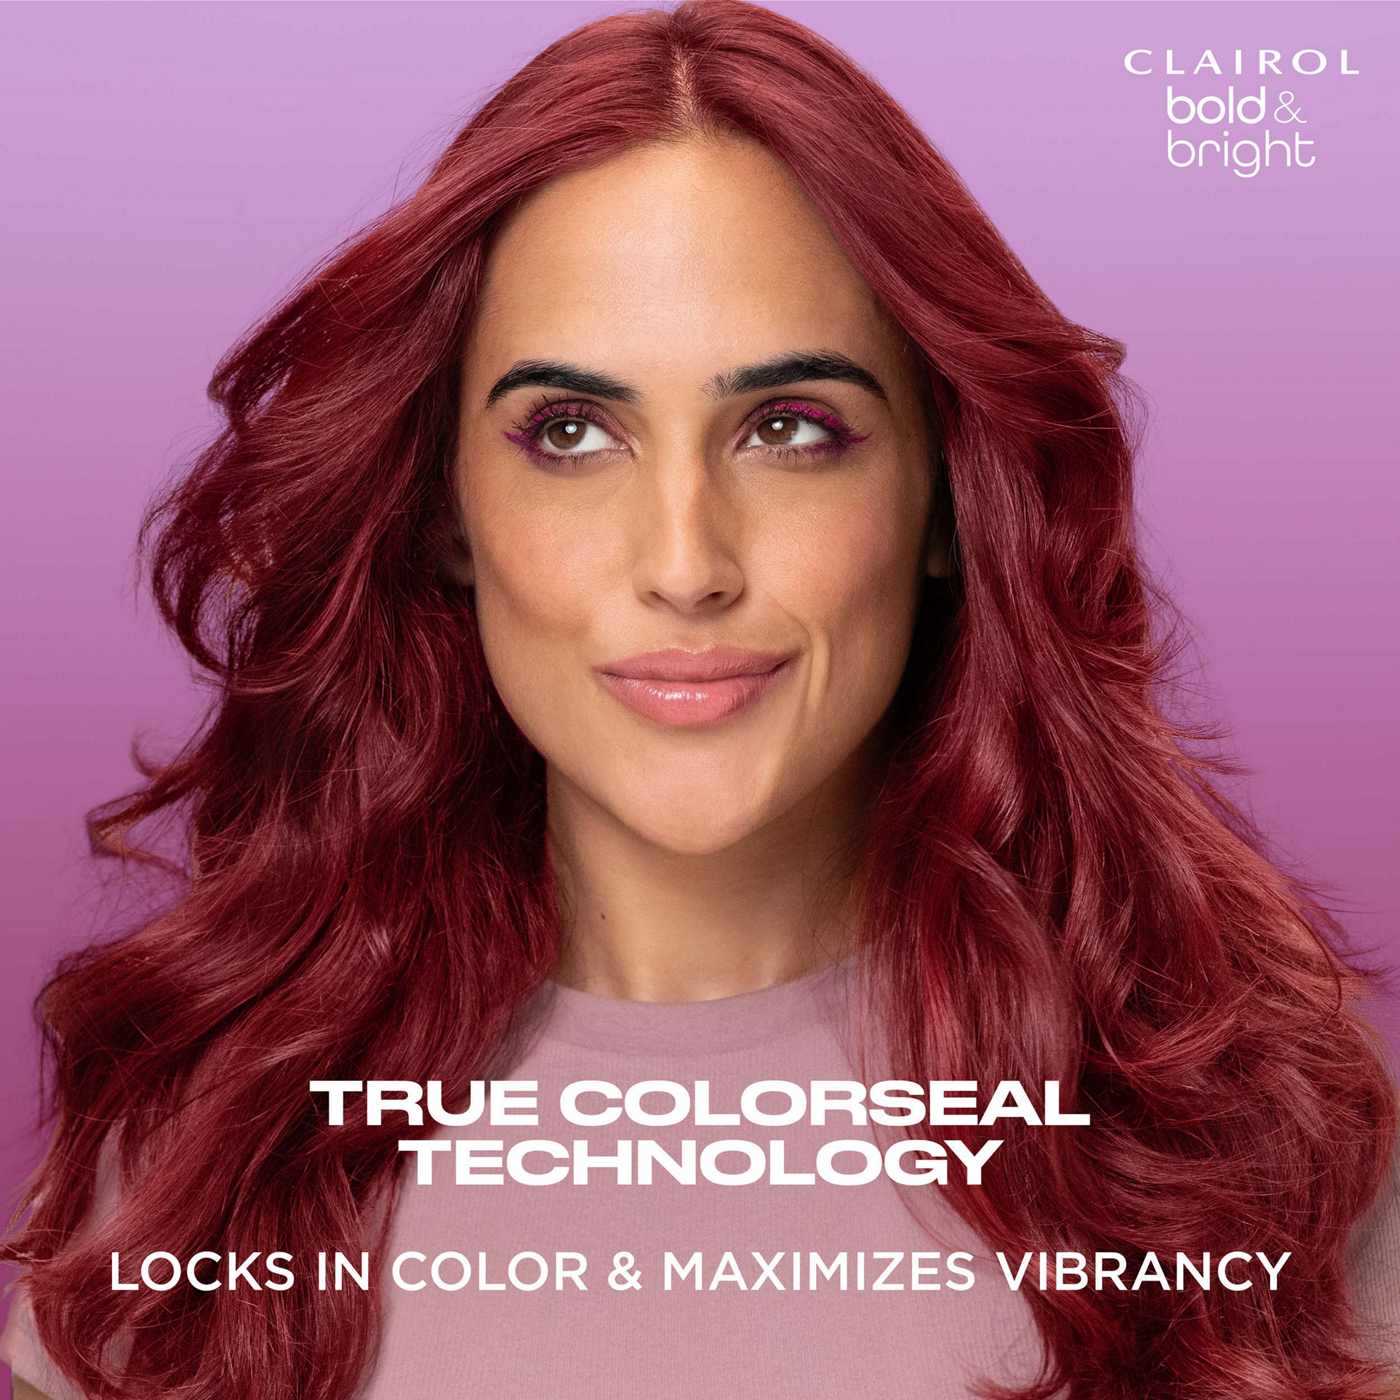 Clairol Bold & Bright Permanent Hair Color - 20 Black Licorice; image 9 of 11